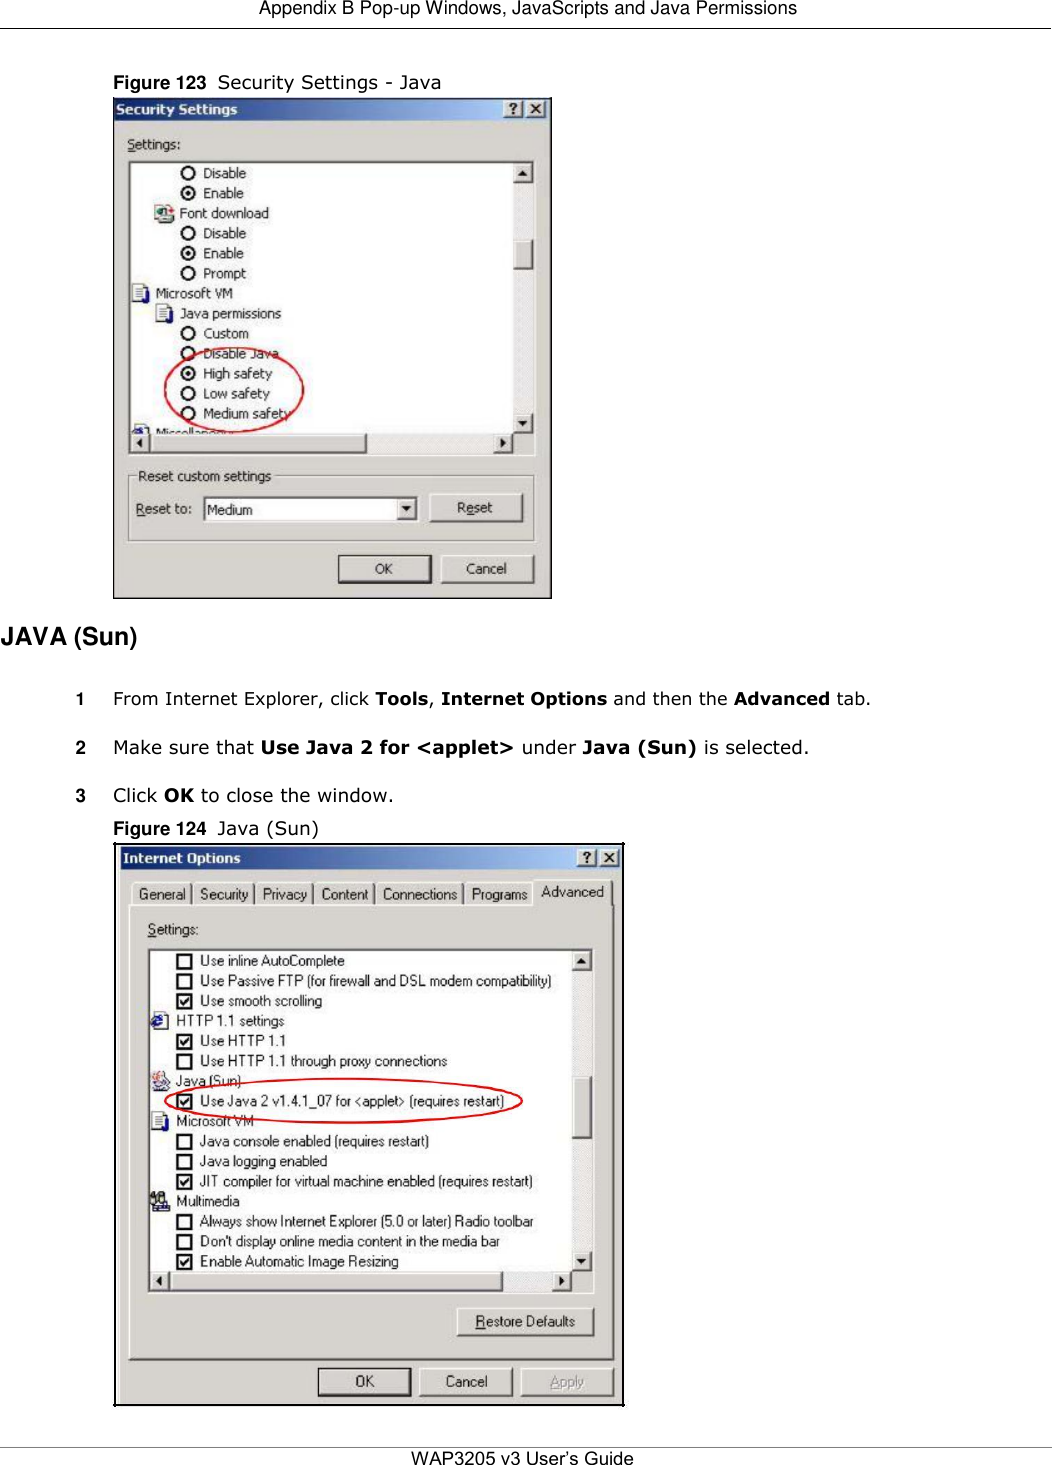  Appendix B Pop-up Windows, JavaScripts and Java Permissions   Figure 123  Security Settings - Java                          JAVA (Sun)  1  From Internet Explorer, click Tools, Internet Options and then the Advanced tab.  2  Make sure that Use Java 2 for &lt;applet&gt; under Java (Sun) is selected.  3  Click OK to close the window.  Figure 124  Java (Sun)                              WAP3205 v3 User’s Guide 